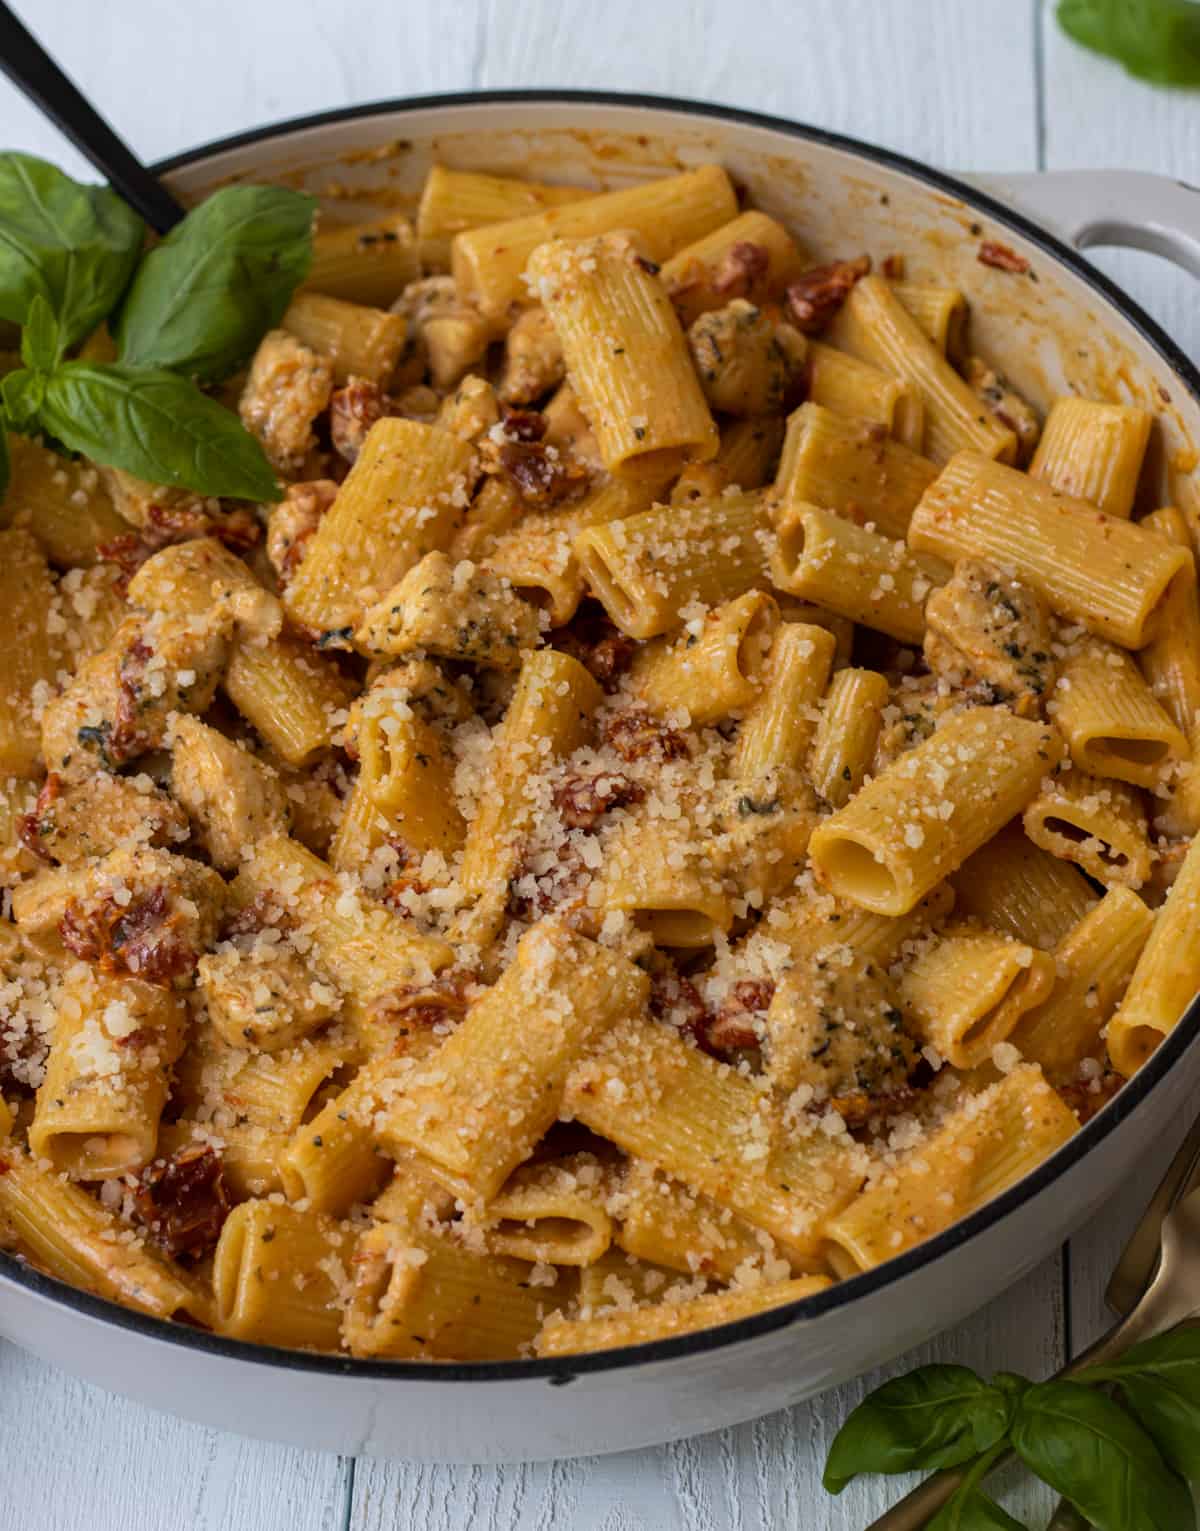 Sun-dried tomato chicken pasta with basil leaves and a large spoon.